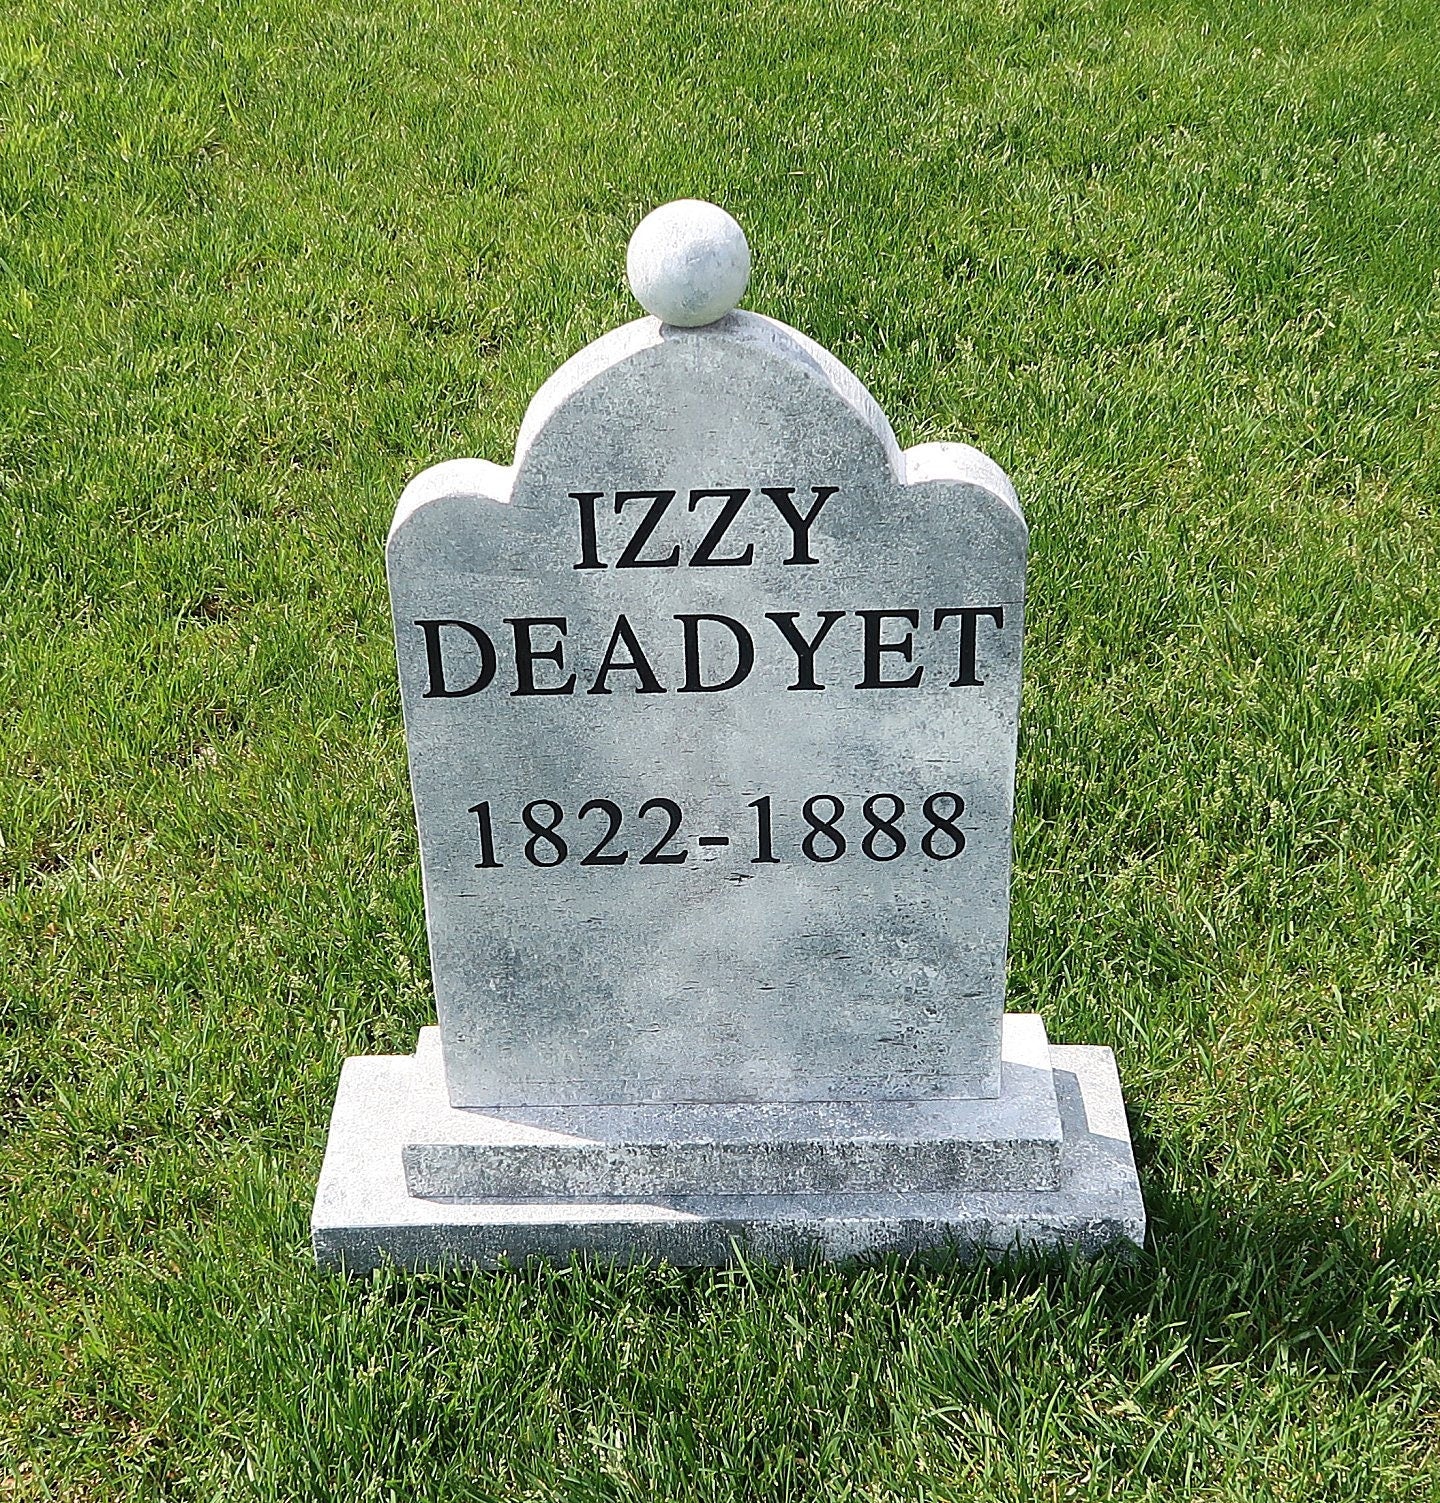 IZZY DEADYET Silly Halloween Tombstone Prop